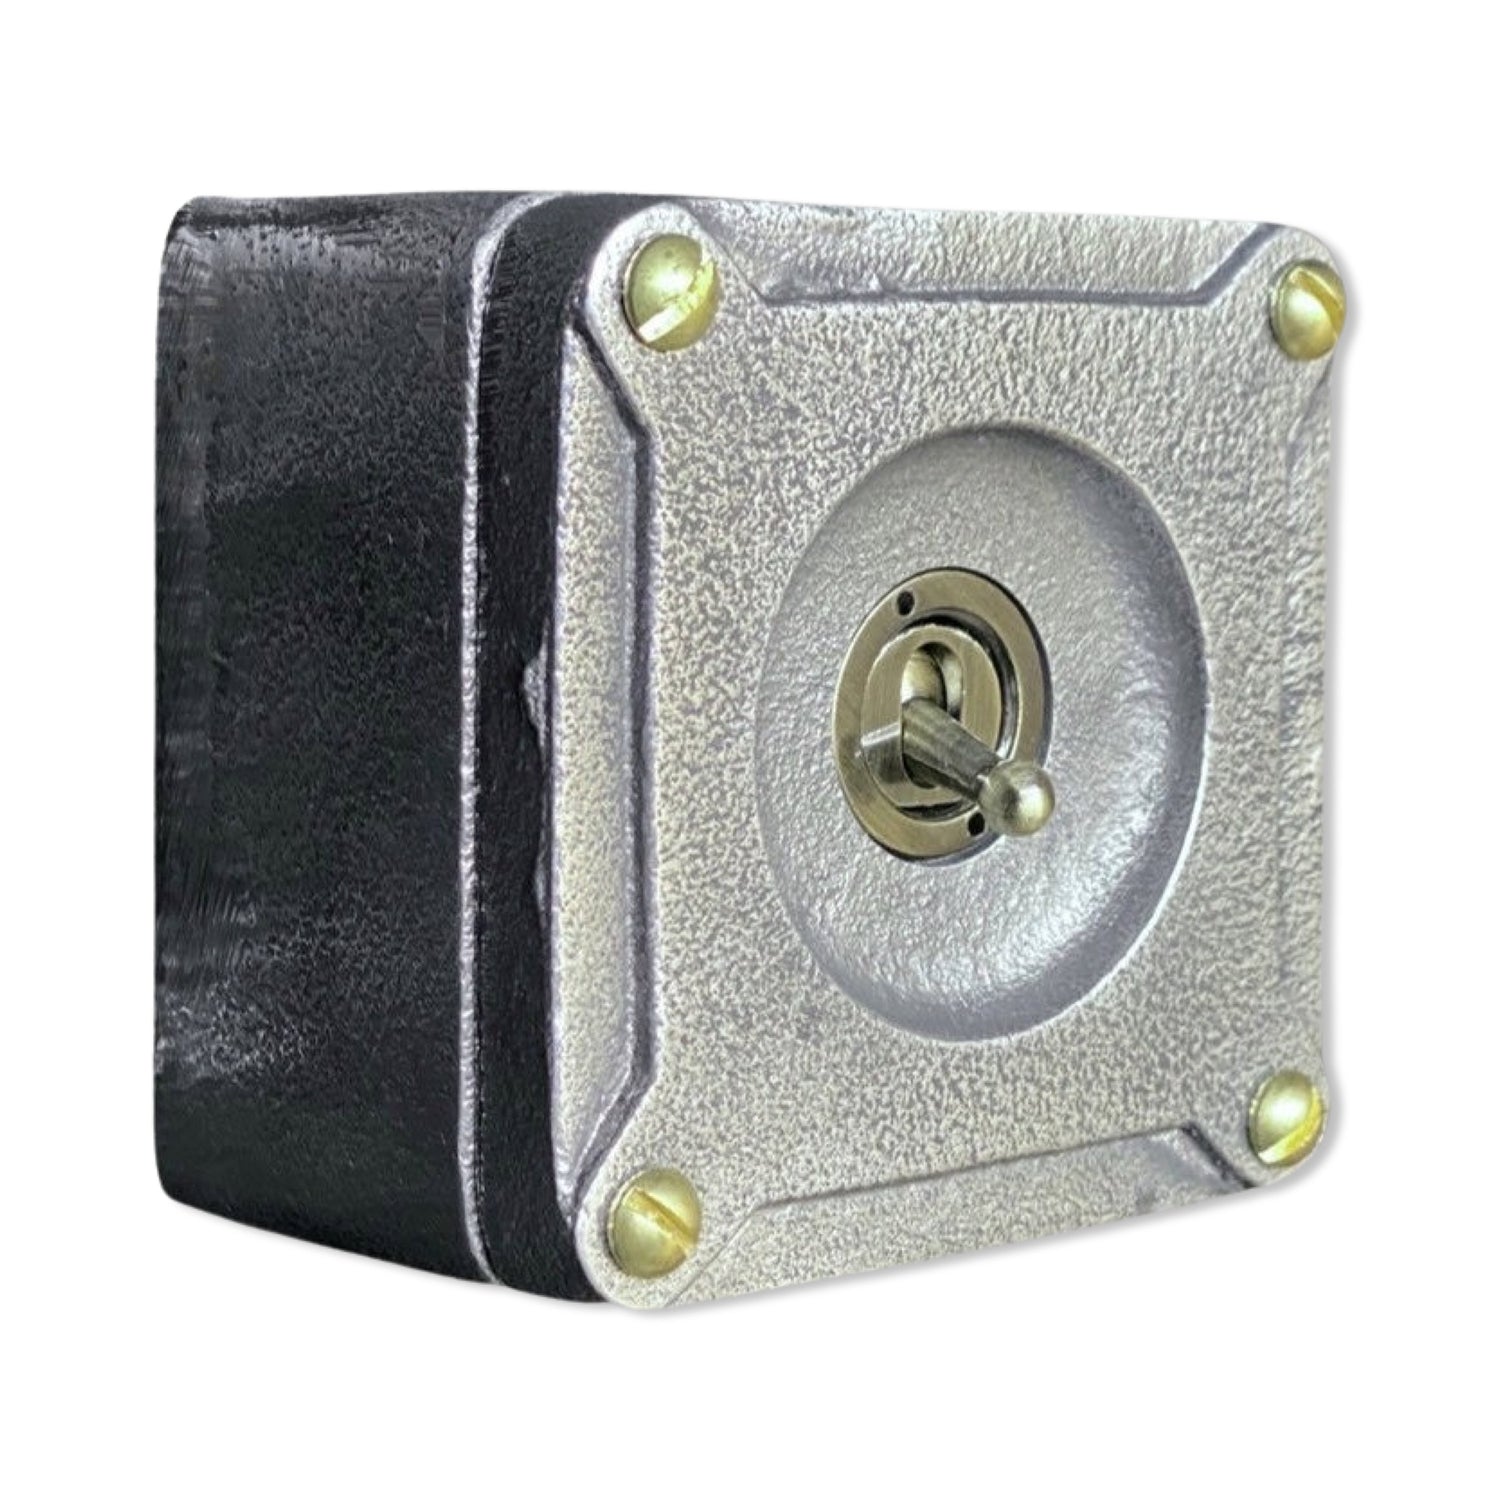 Single Gang Solid Cast Metal Light Switch Industrial 2 Way - BS EN Approved Vintage Britmac 1950’s Style